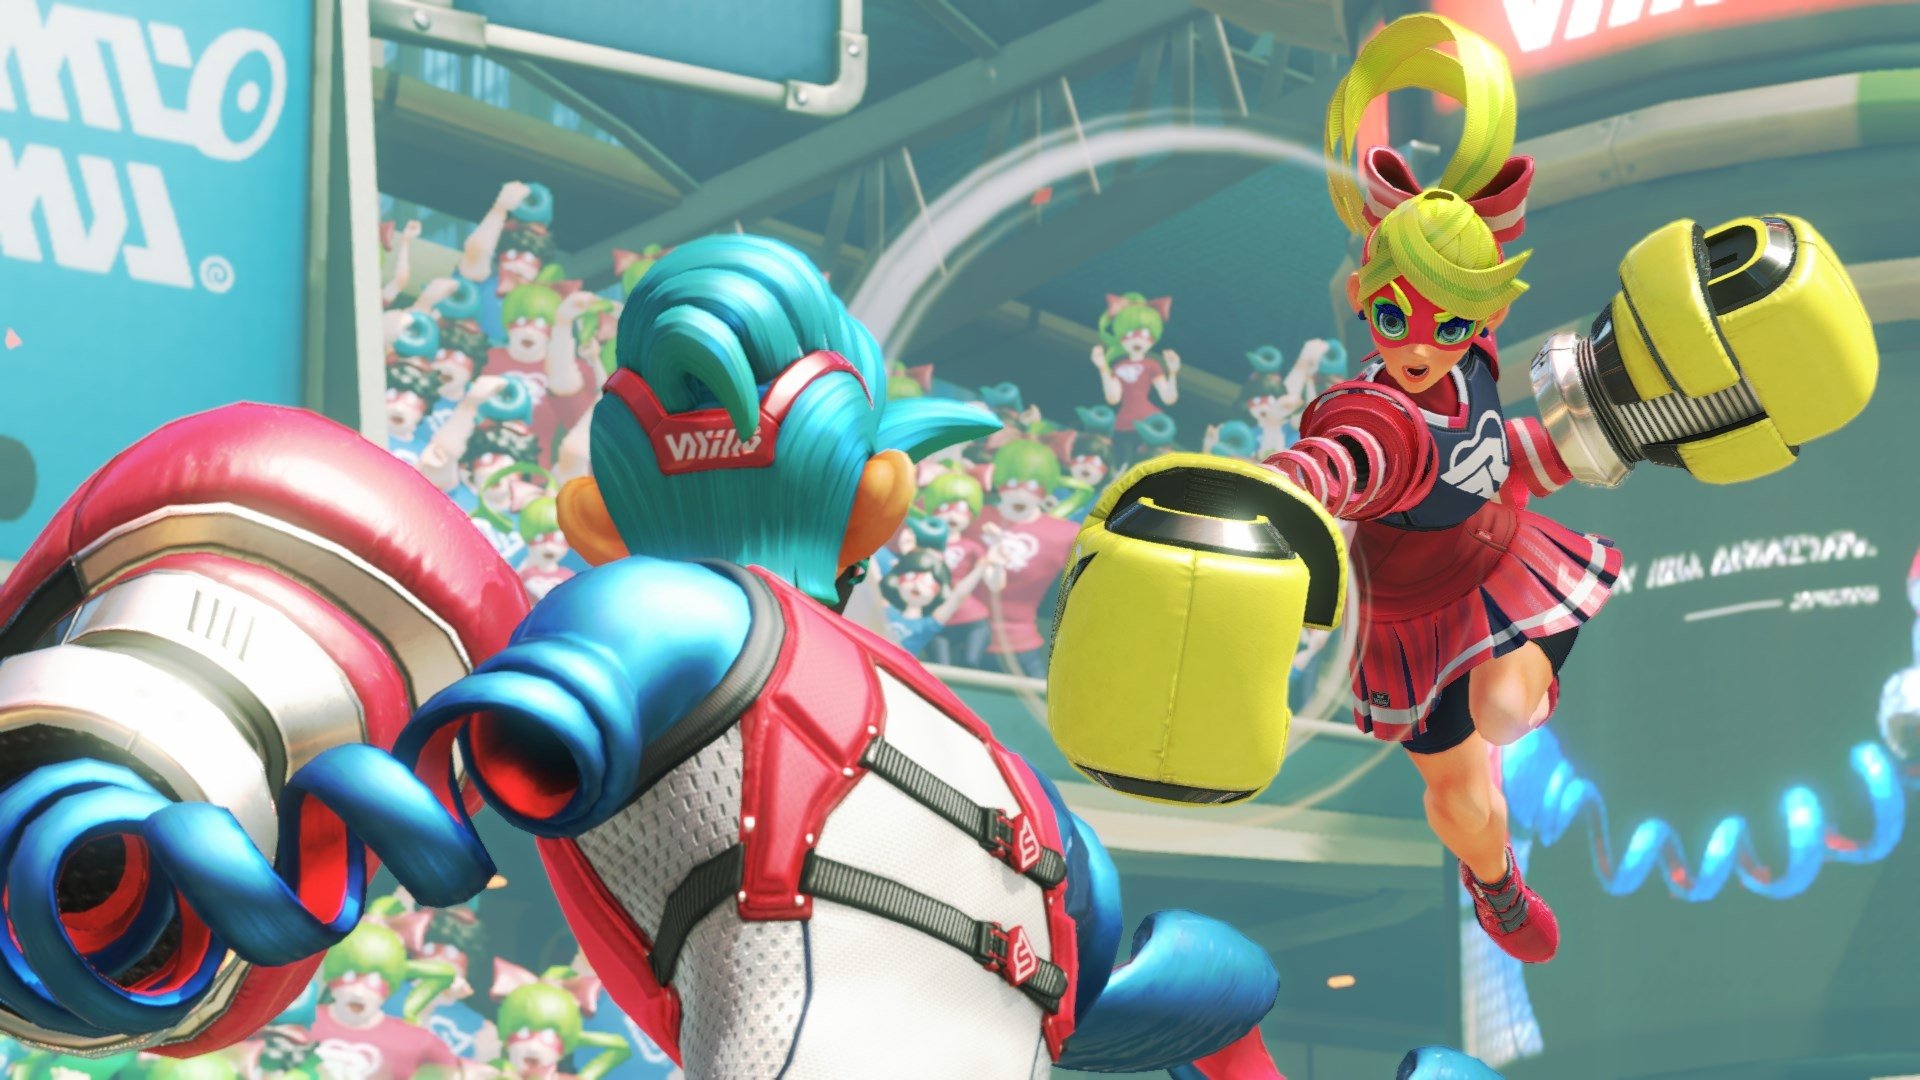 Arms HD Wallpaper Background Image Id